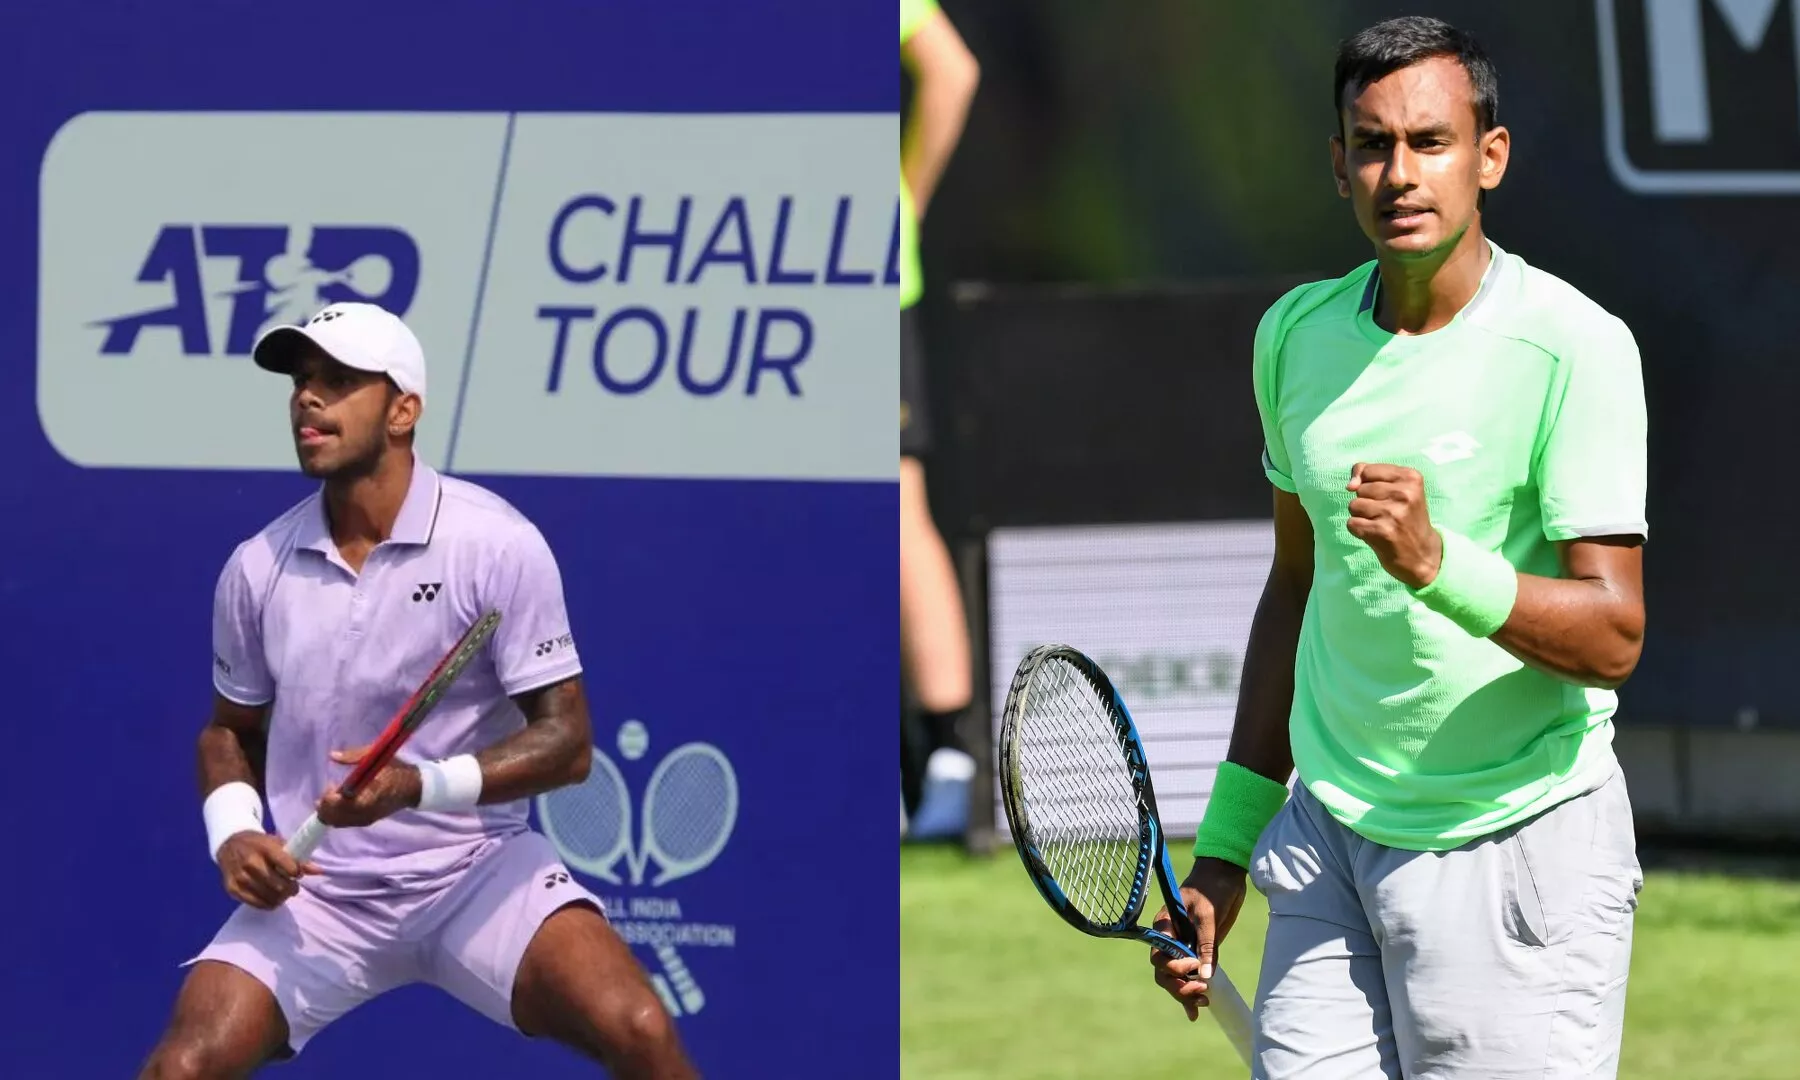 Always fun playing at home Sumit Nagal, Mukund Sasikumar delighted to play tennis events in India again